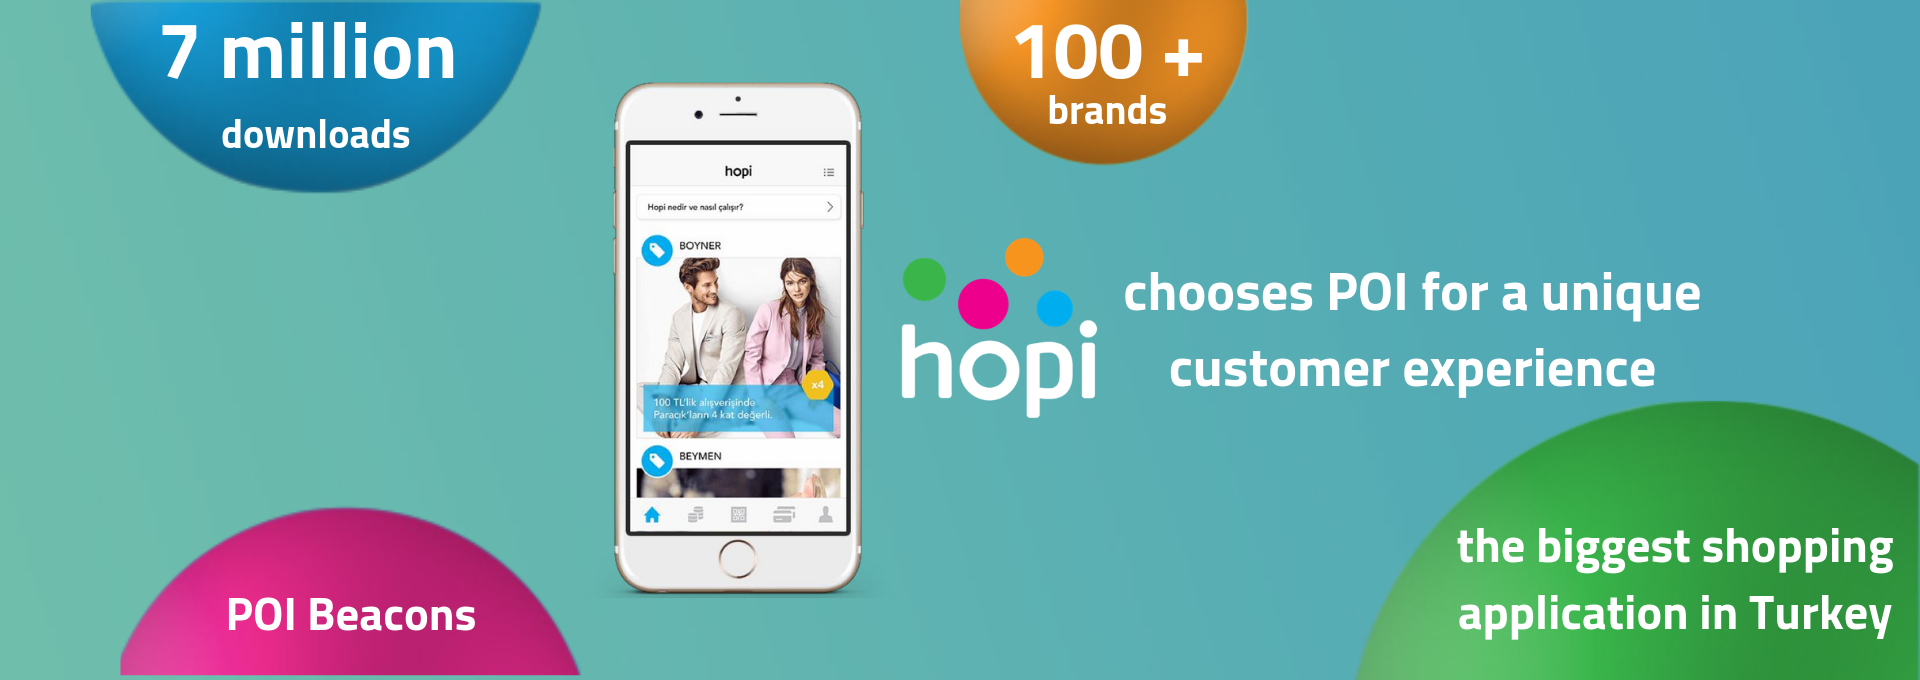 Hopi chooses PoiLabs for a unique customer experience